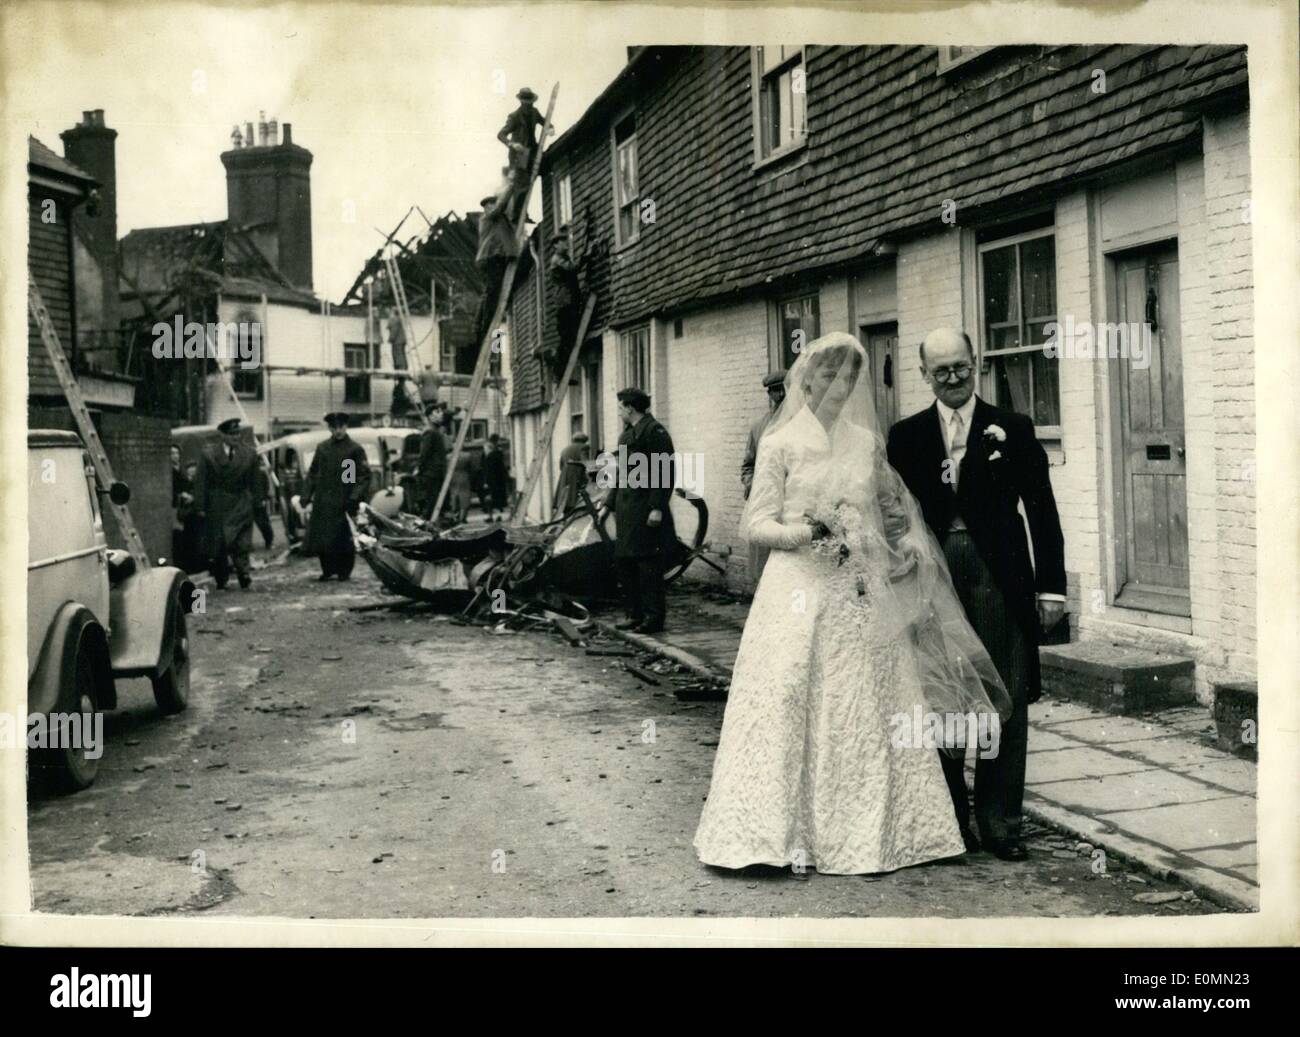 Jan. 01, 1956 - WEDDING AT THE VILLAGE CHURCH - SCENE OF THE AIR CRASH.. BRIDE ESCORTED THROUGH WRECKAGE BY HER UNCLE.. The wedding was held this afternoon at Wadhurst, Sussex, village church of 23 years old Miss Peggy Hazelden, of Hawkhurst and Mr. John Jackson of Wadhurst.. The guests had to pick their way through the rubble of wrecked buildings - for Wadhurst was the scene of yesterday's crash of an R.A.F. Meteor - in which two civilians and two servicemen lost their lives.. The only car allowed in the village was that of the bride and groom. Stock Photo